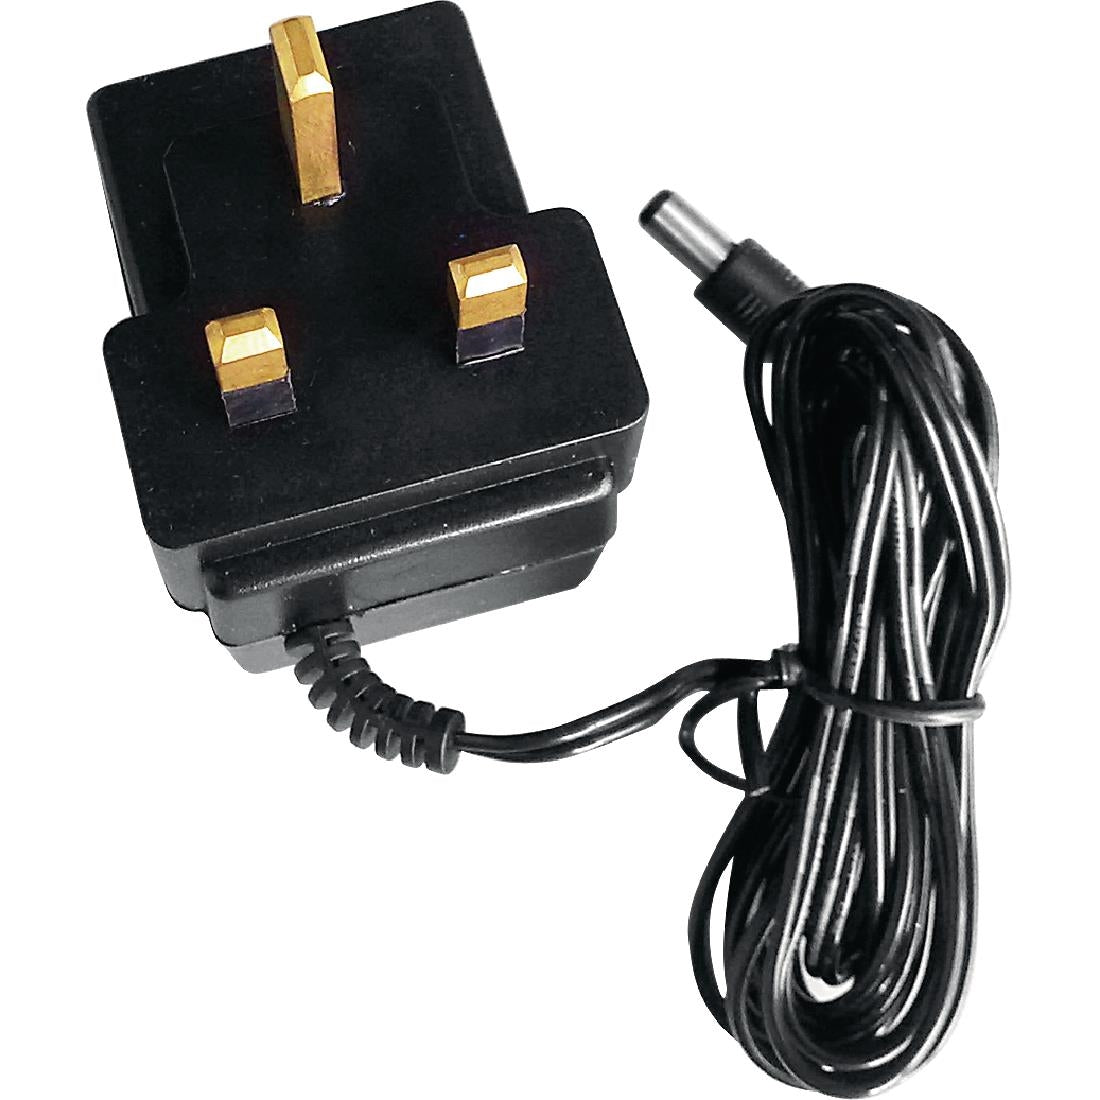 AC861 Power Adapter for Weighstation Scales CD564 JD Catering Equipment Solutions Ltd